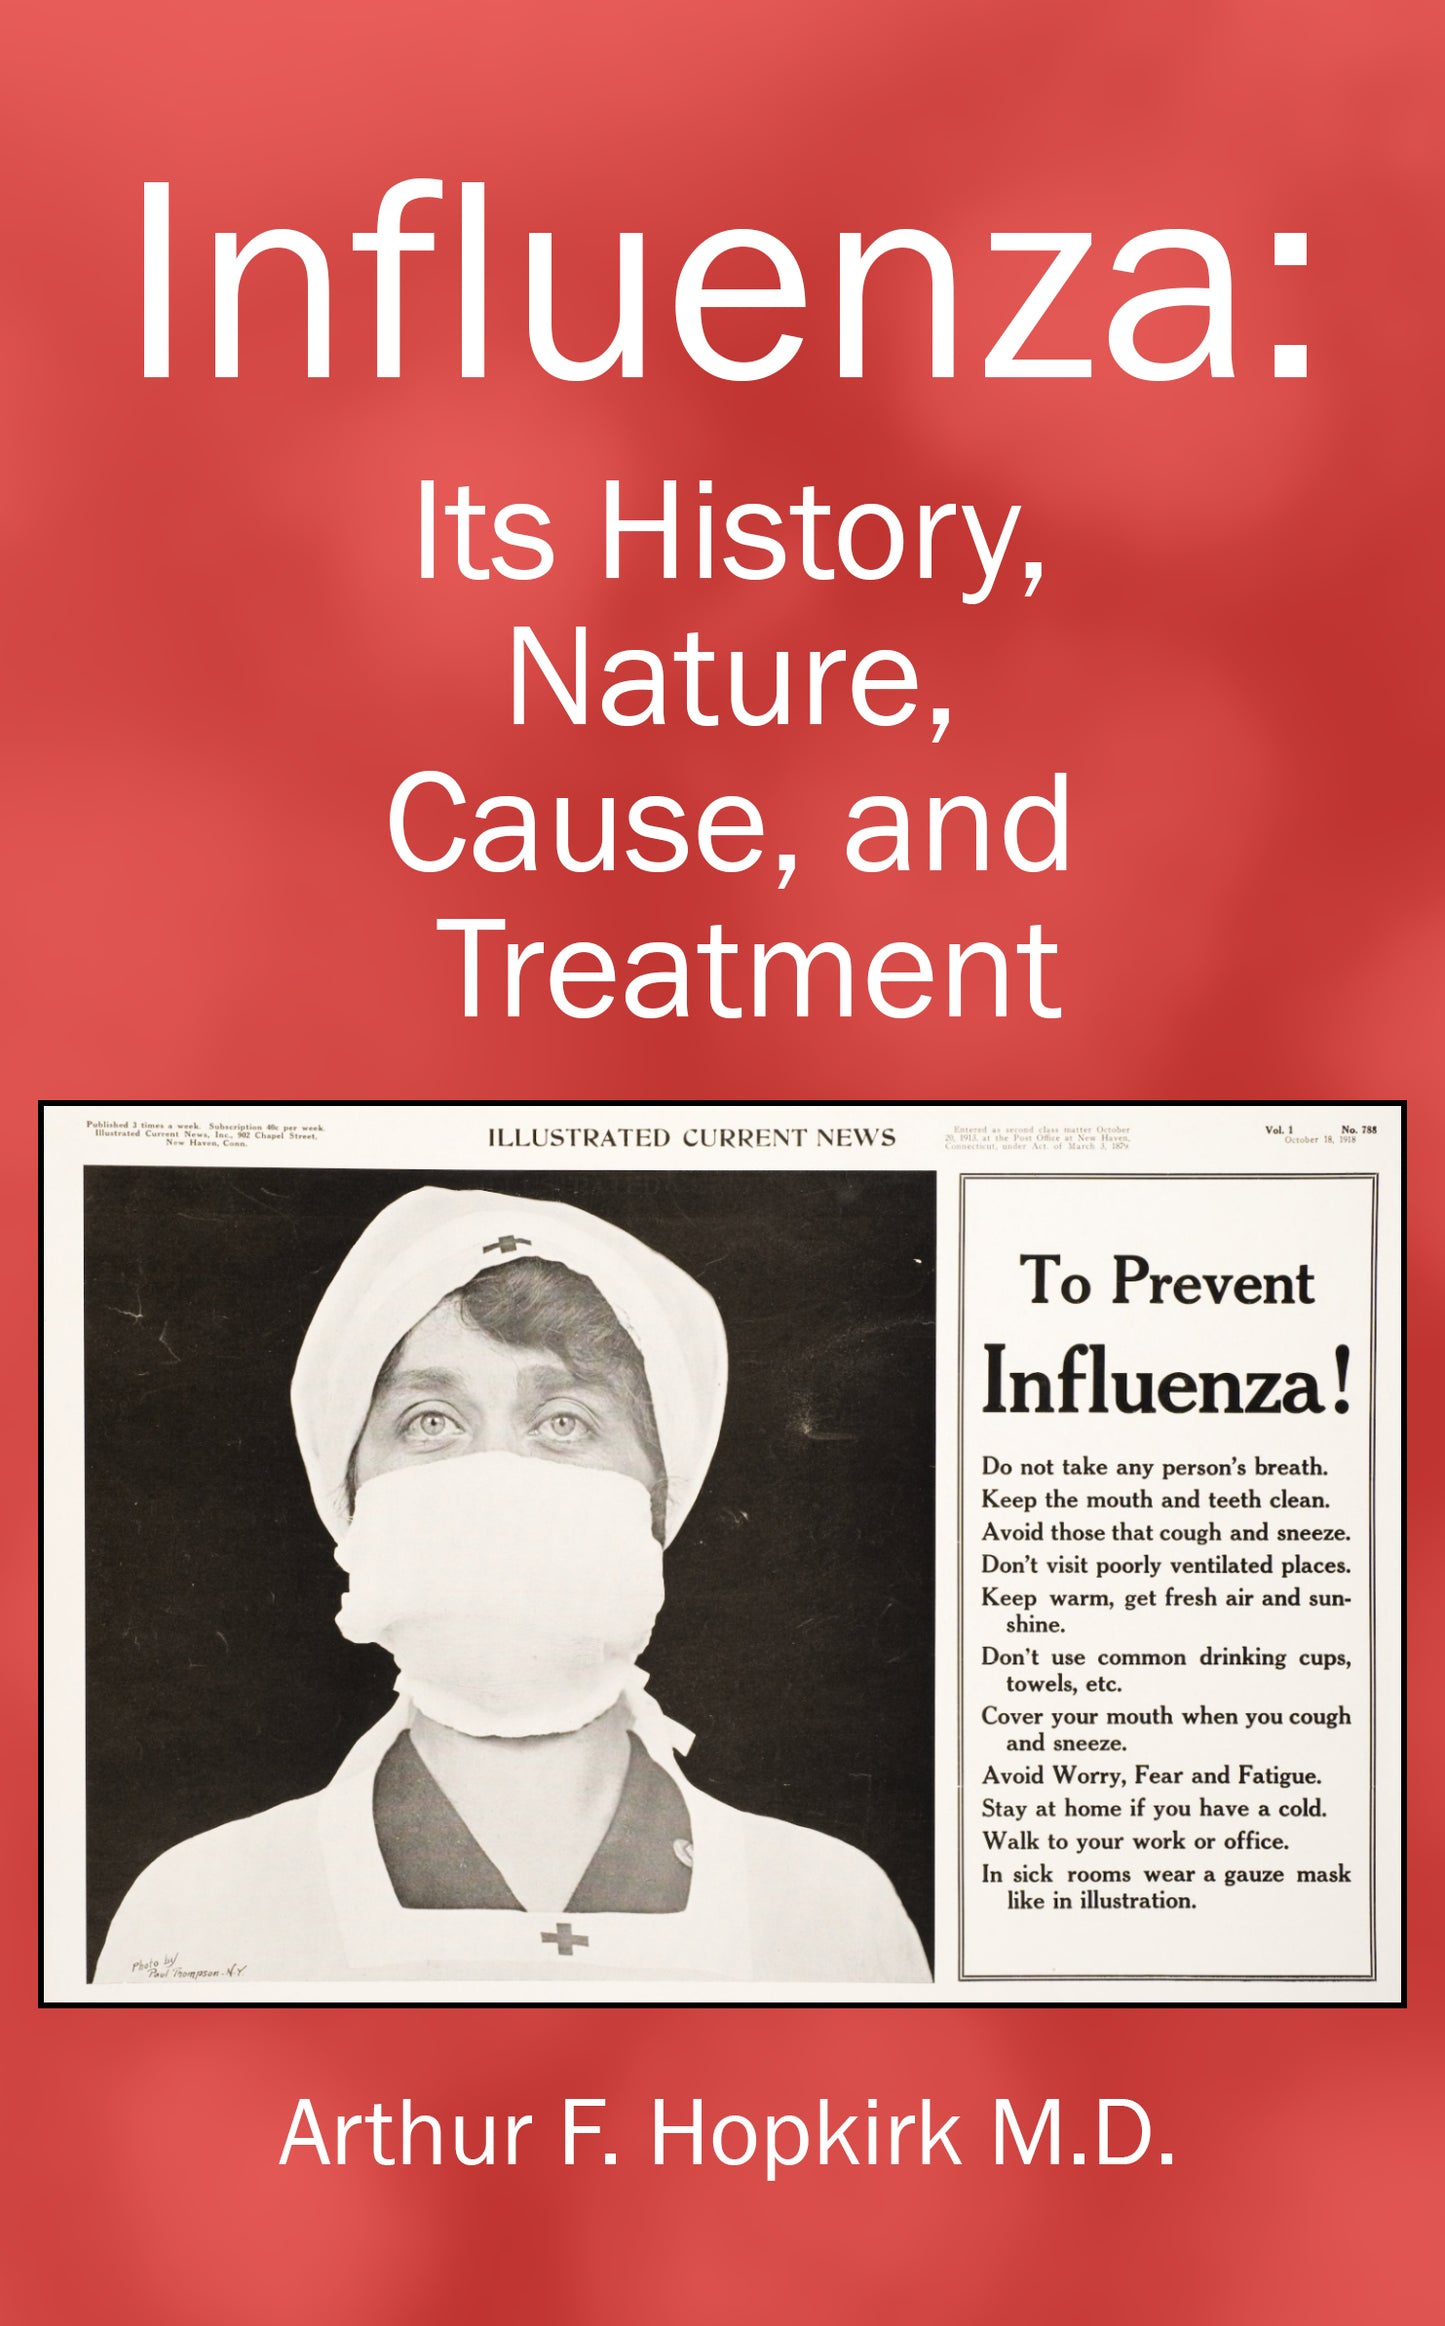 Influenza: Its History, Nature, Cause, and Treatment